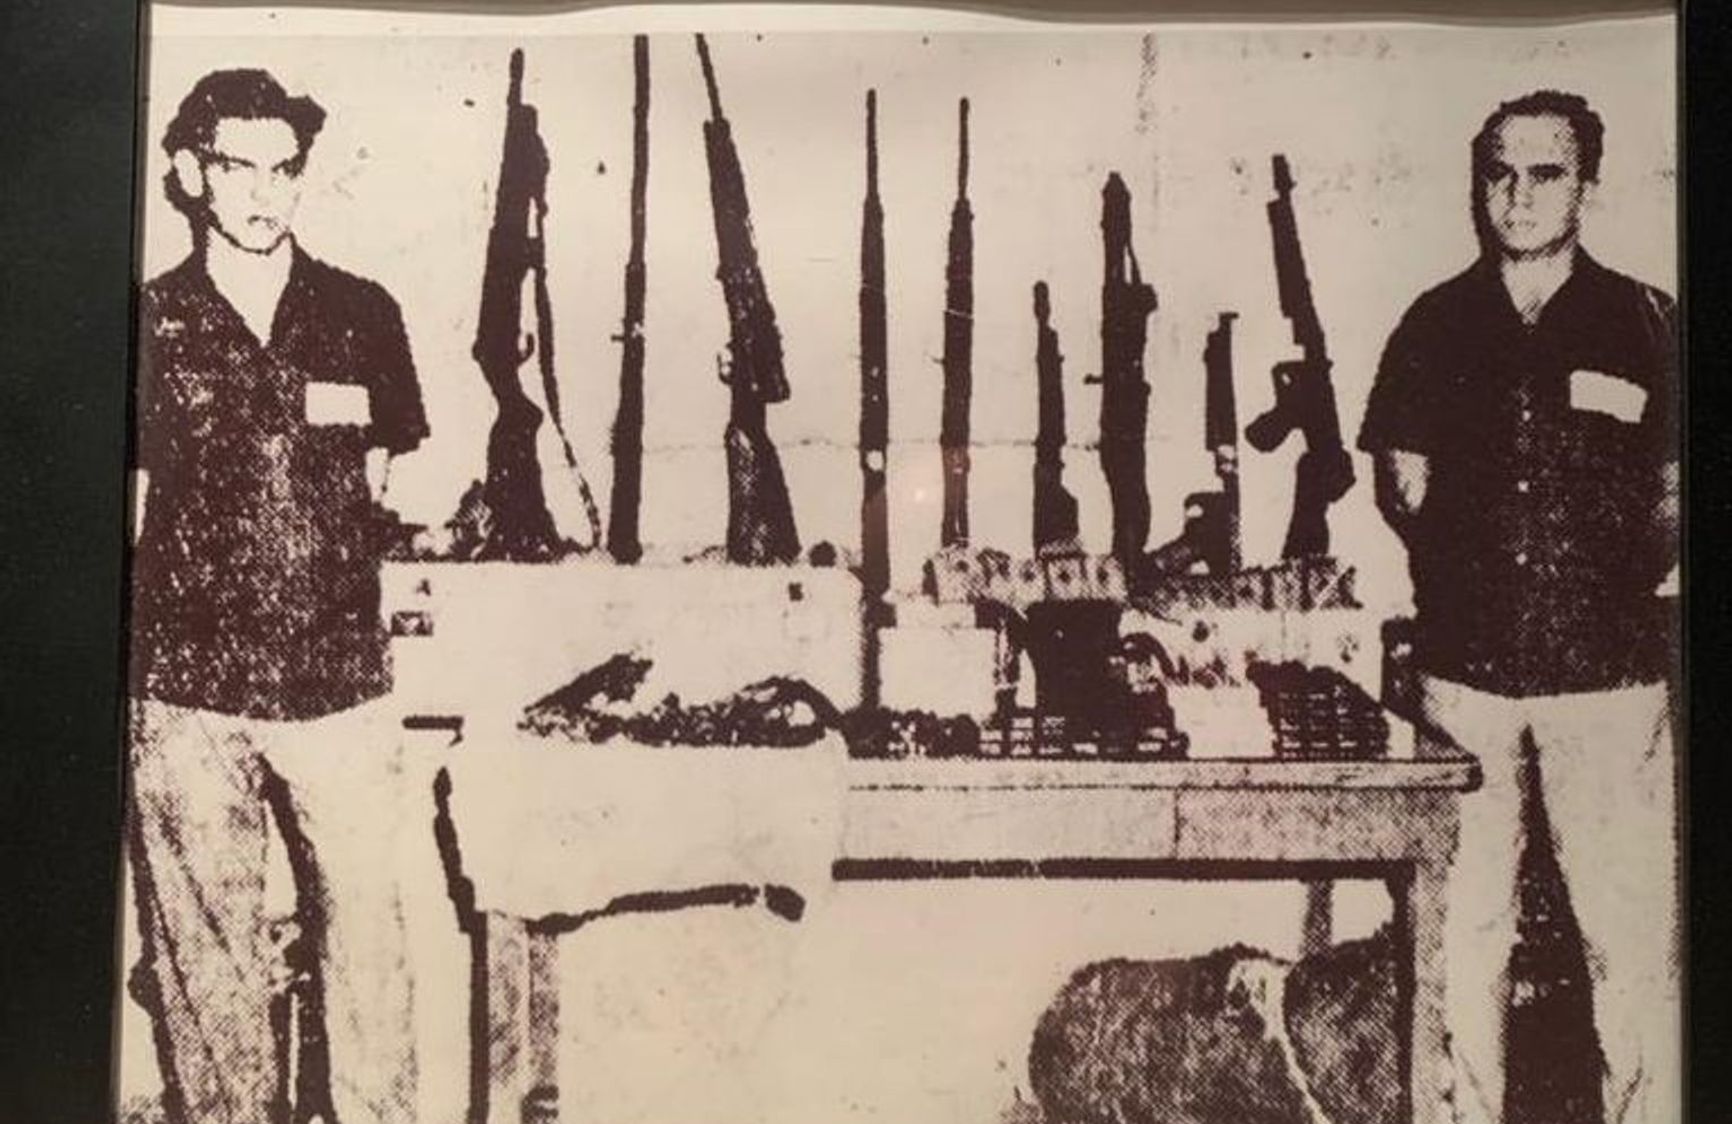 Weapons seized by the authorities from Fuentes-Cid's group (photo from his personal archive)